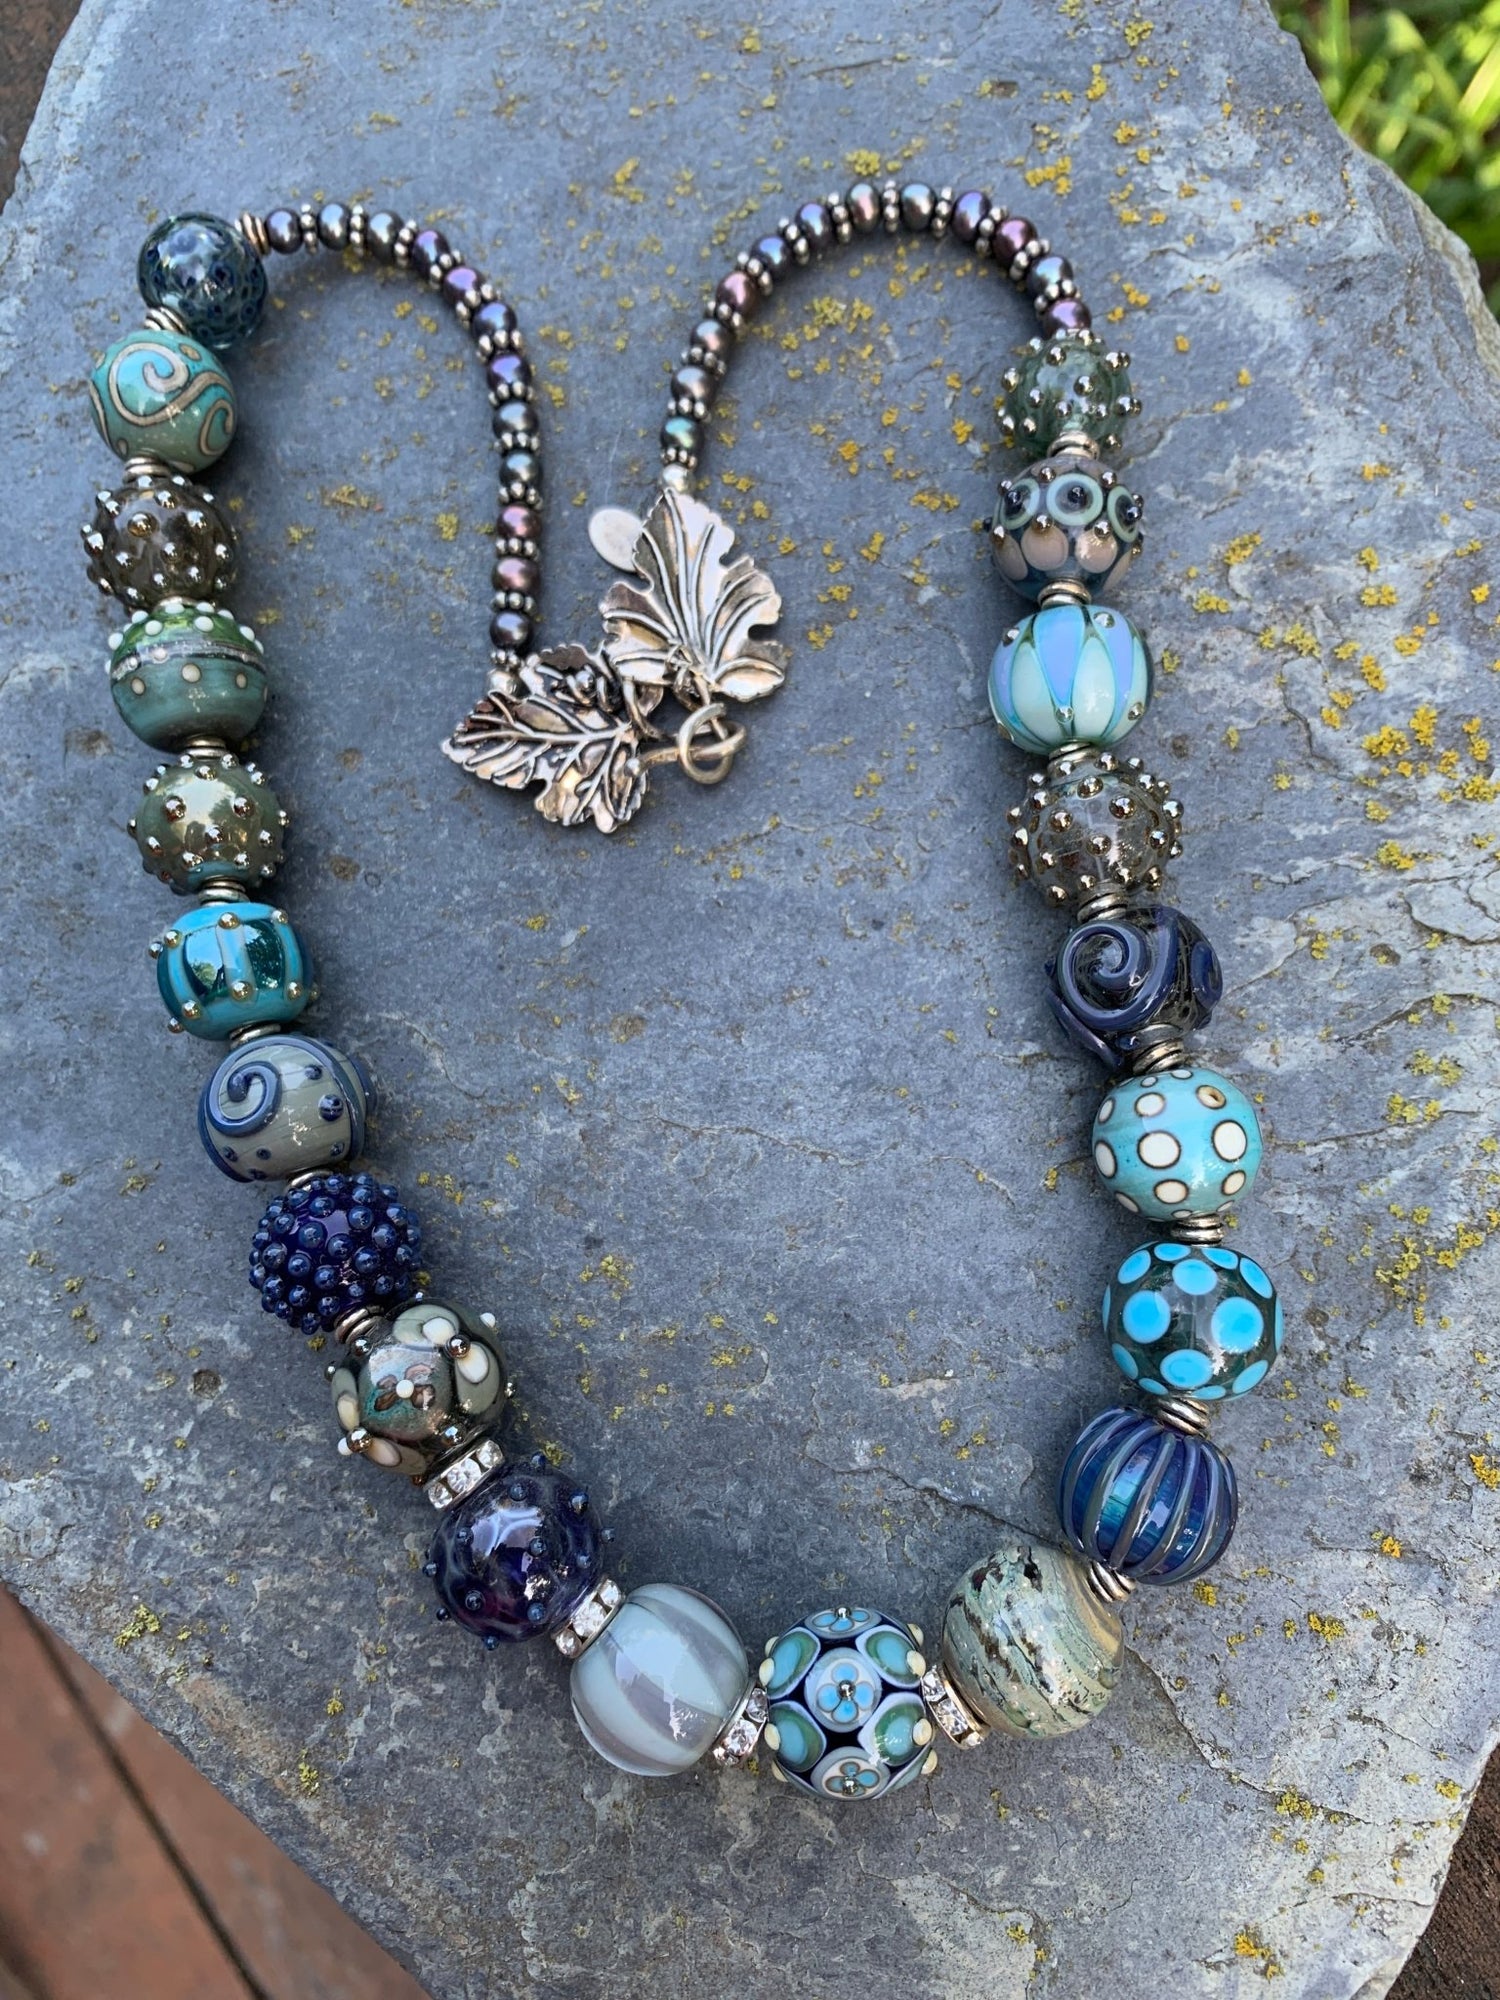 Boho Bead Collector's Necklace - The Glass Acorn